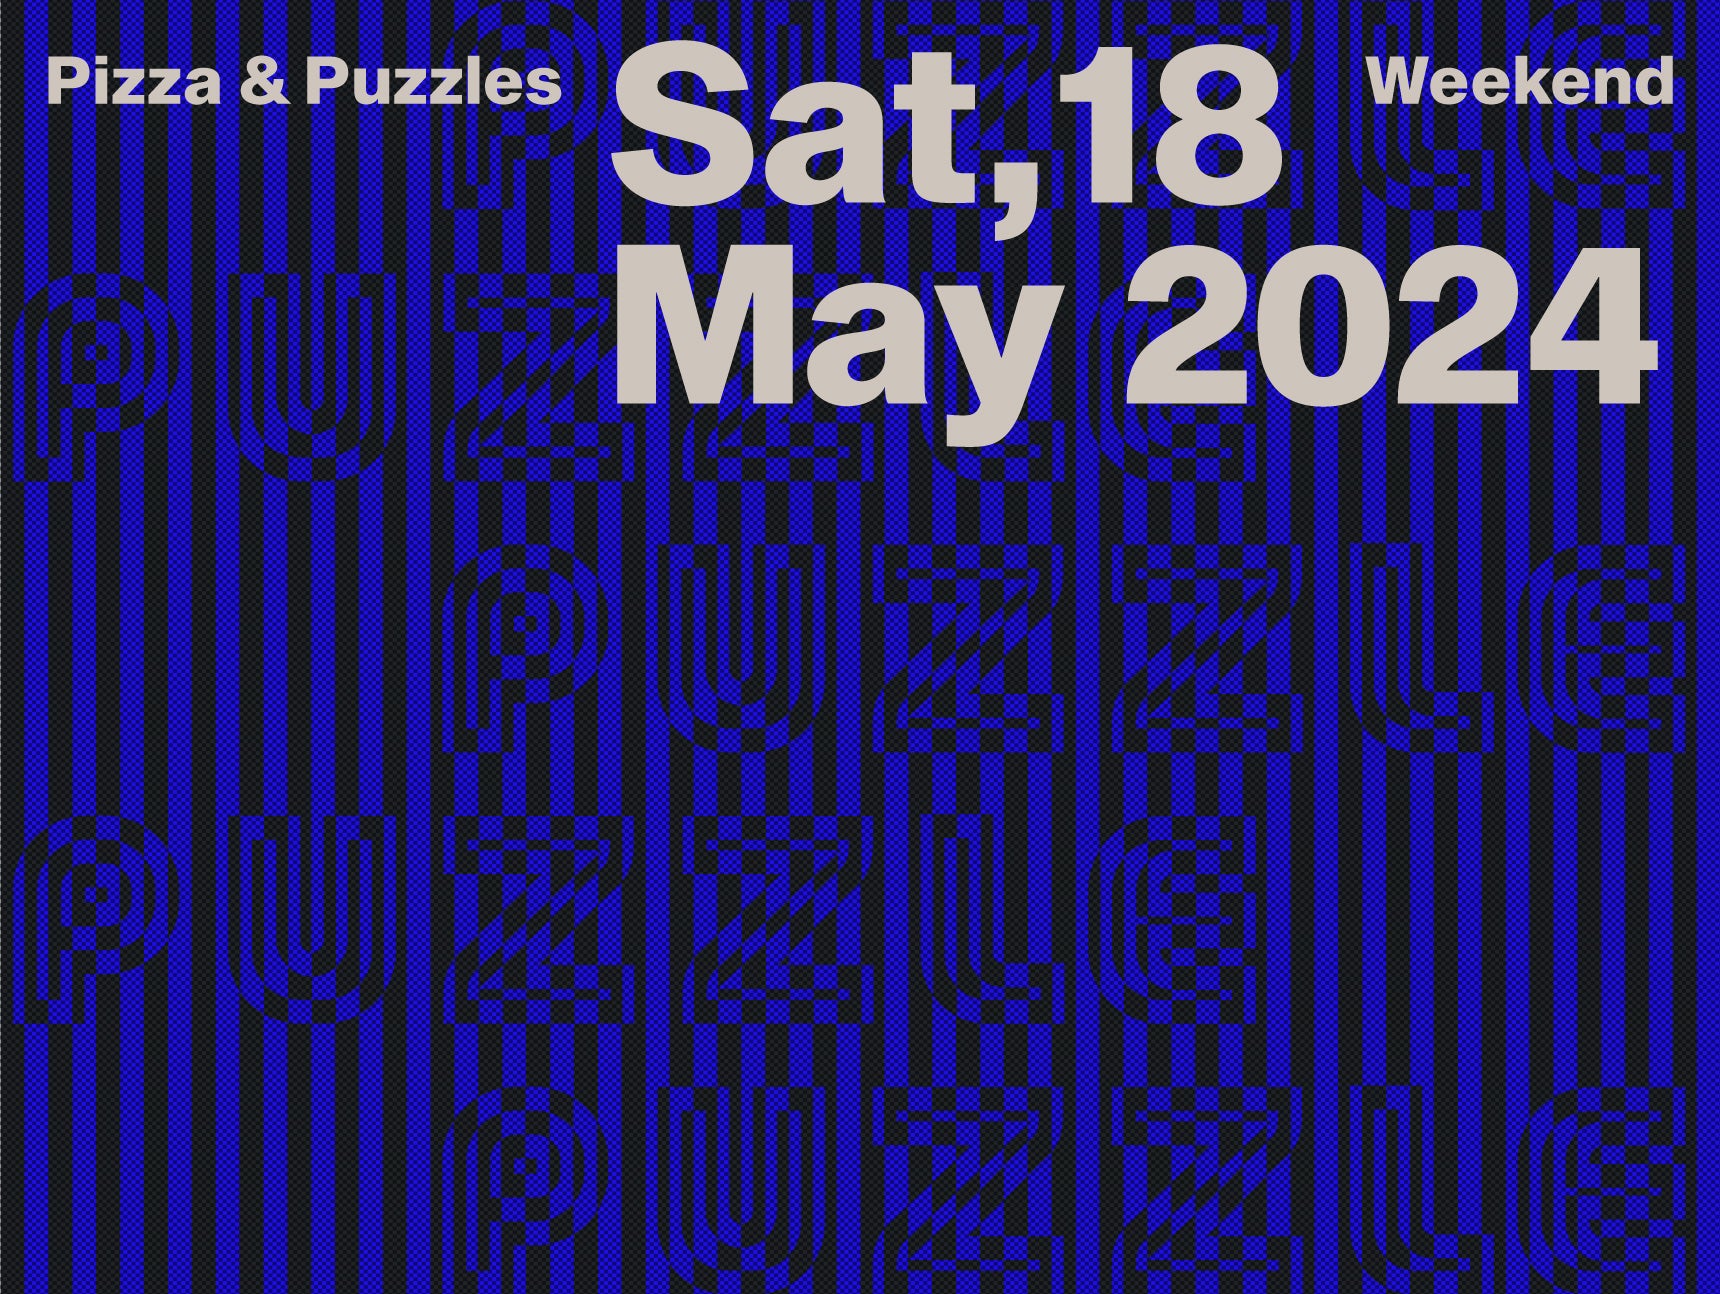 Team Jigsaw Puzzle Competition - 18 May 2024, Saturday